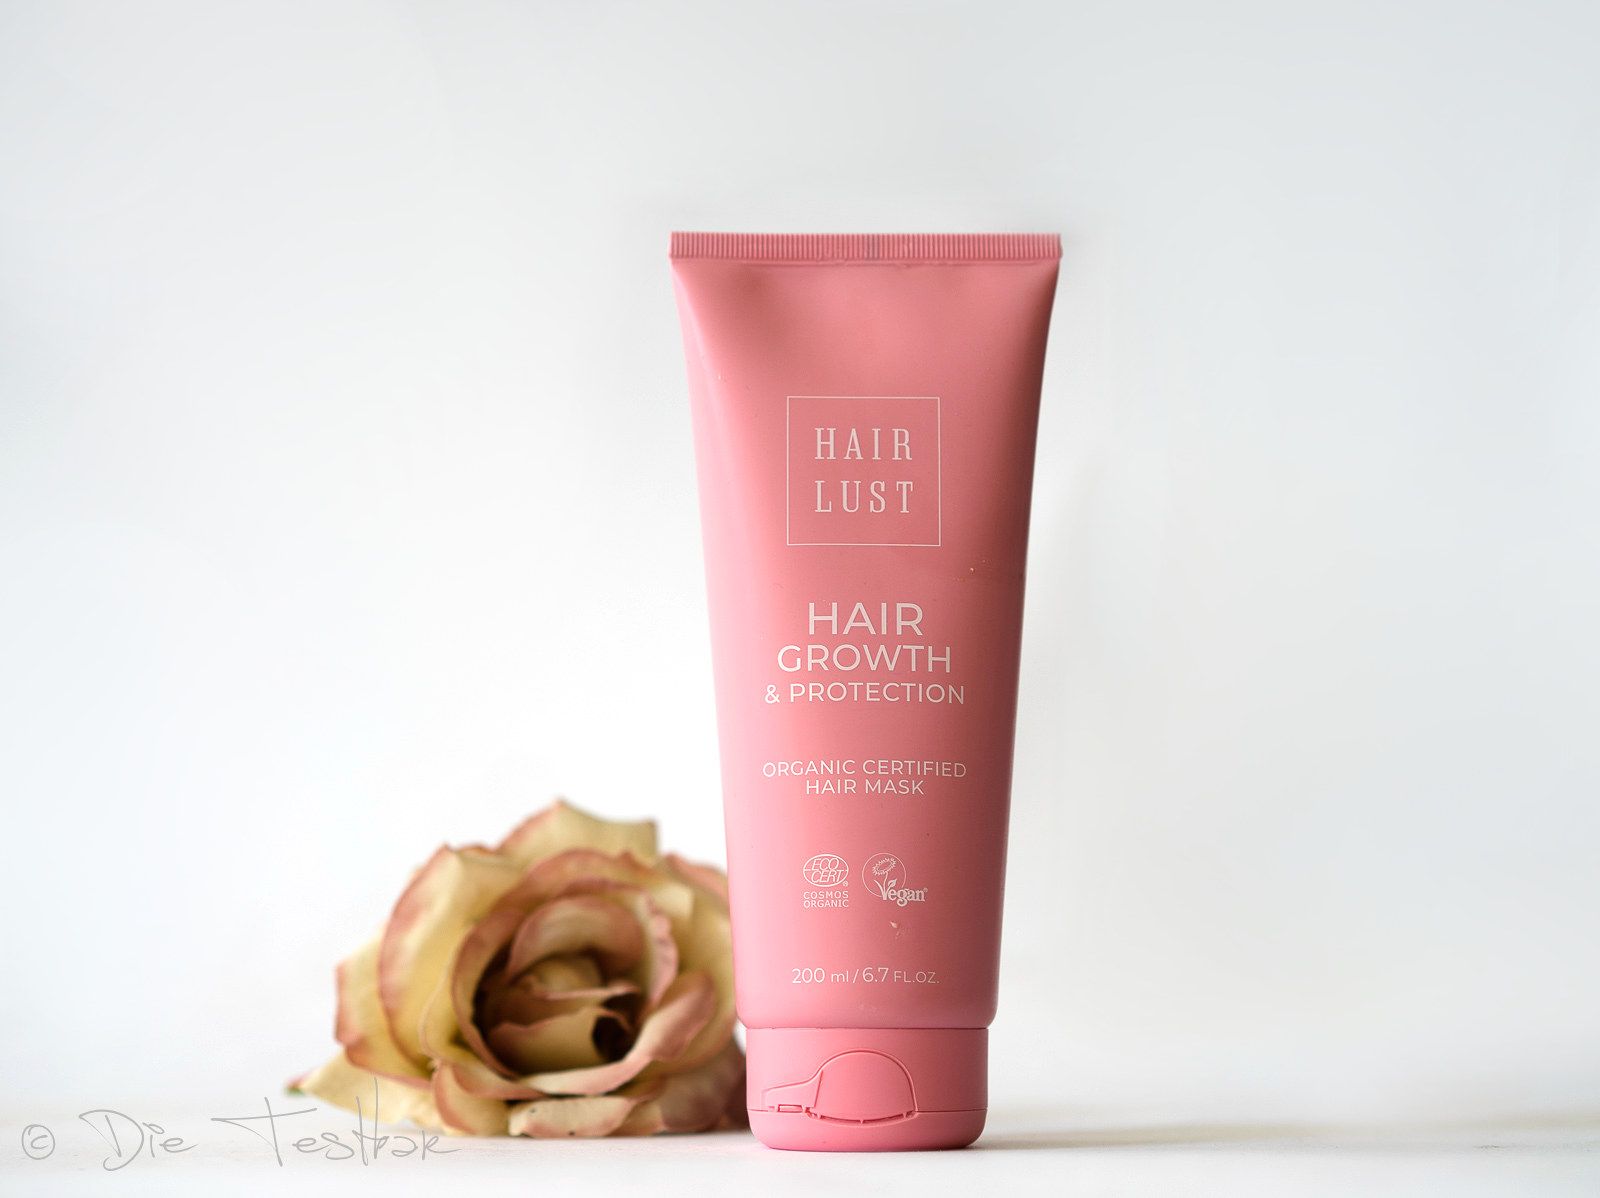 Hair Growth & Protection Mask